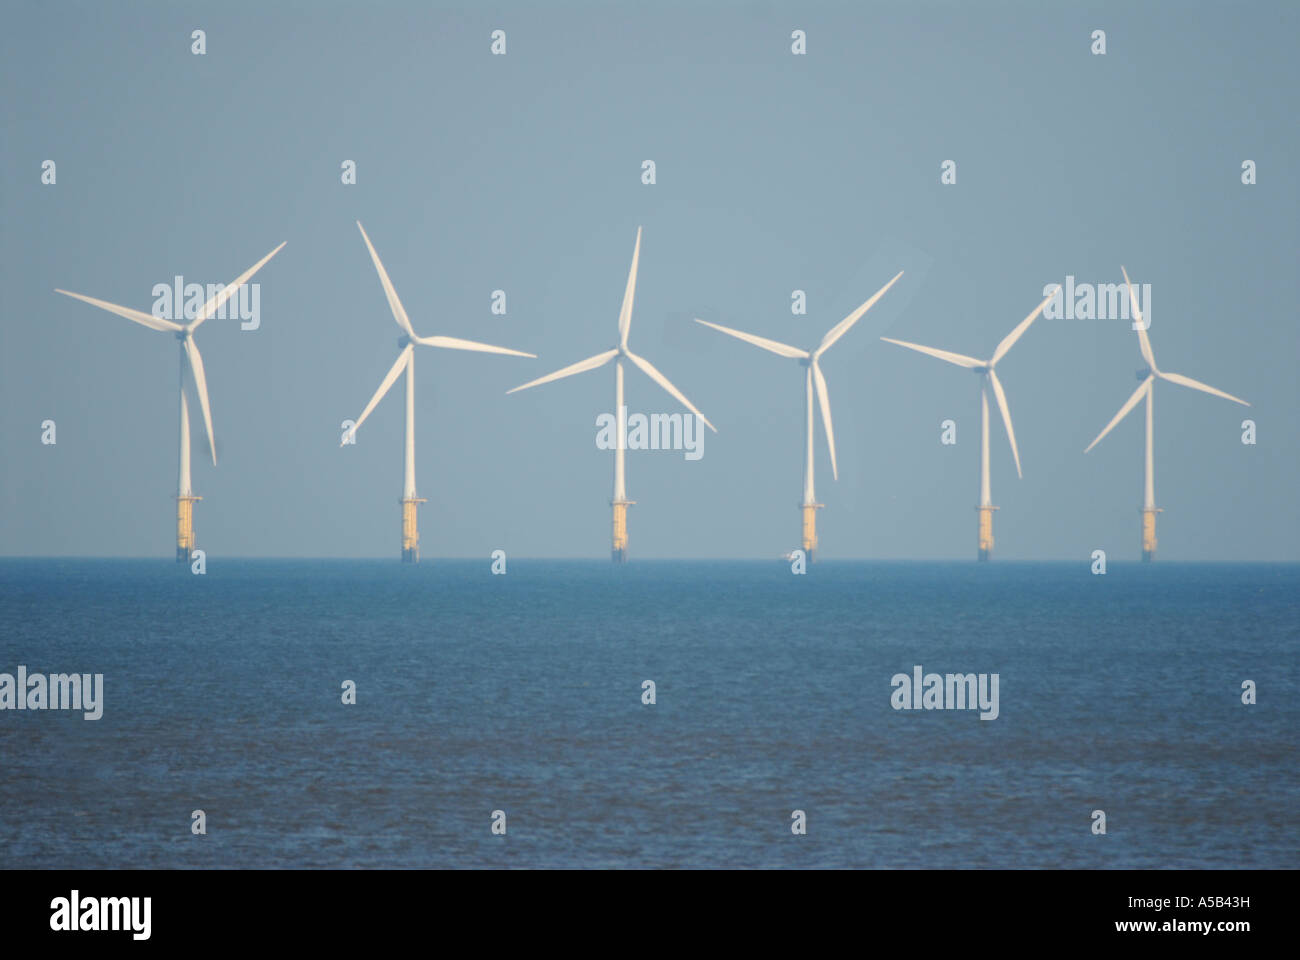 A row of Wind Turbines in the sea Stock Photo